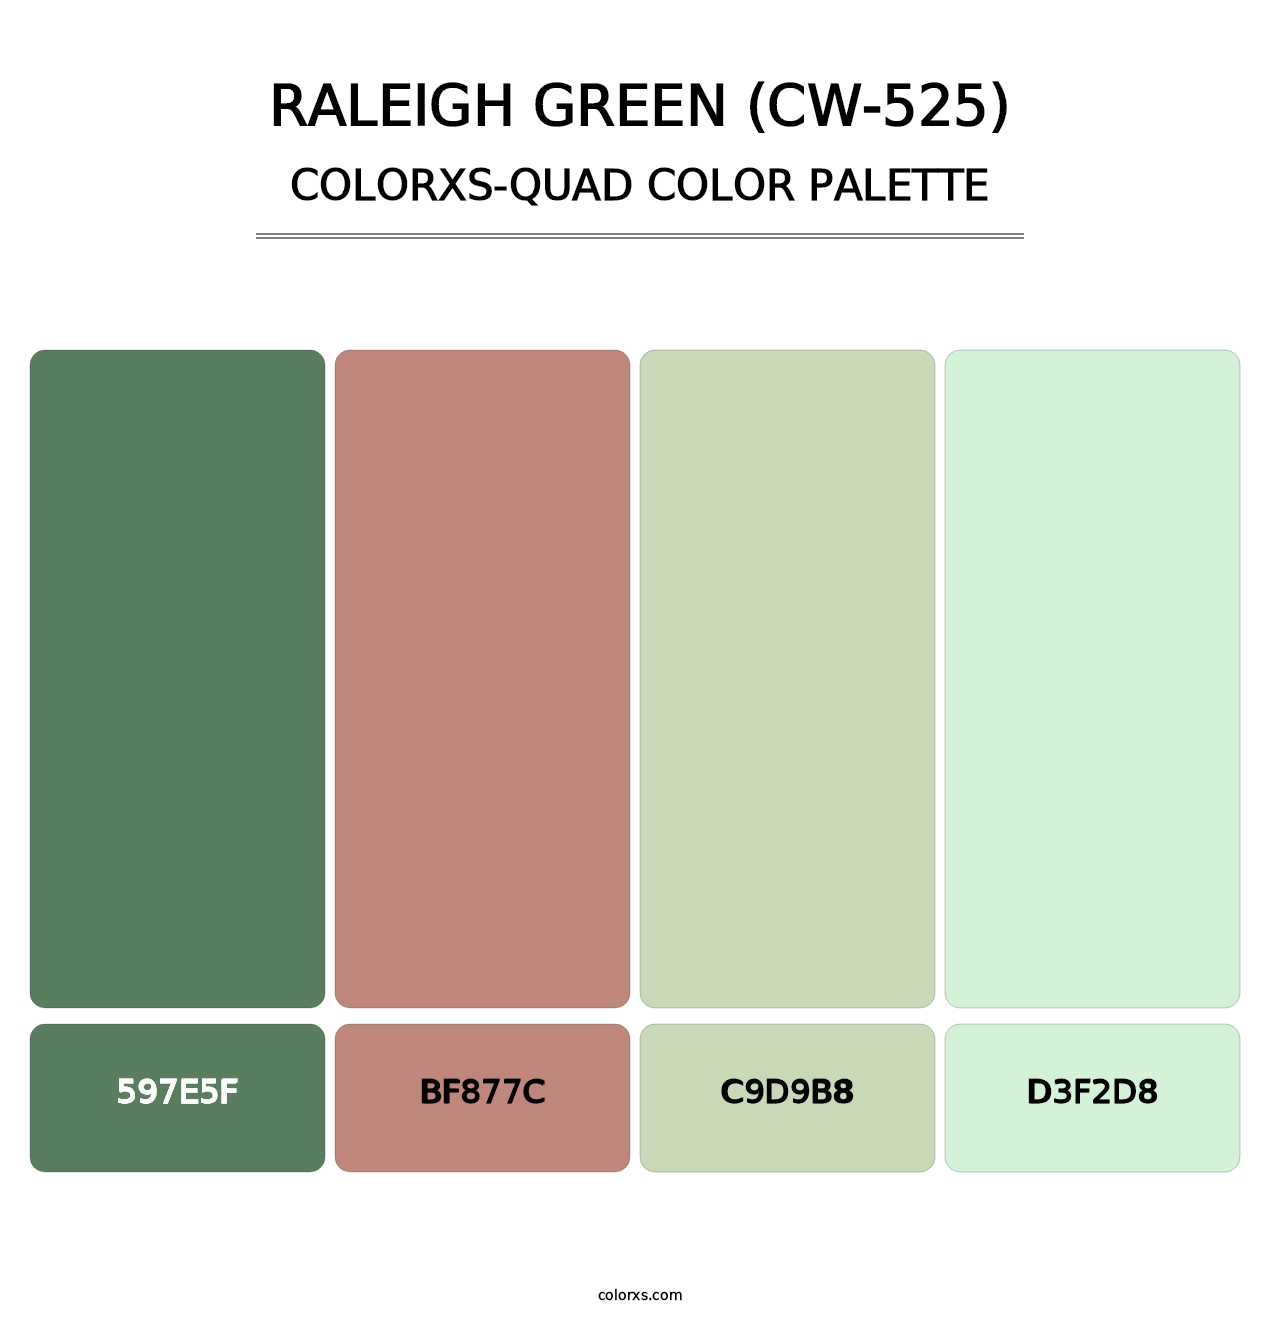 Raleigh Green (CW-525) - Colorxs Quad Palette